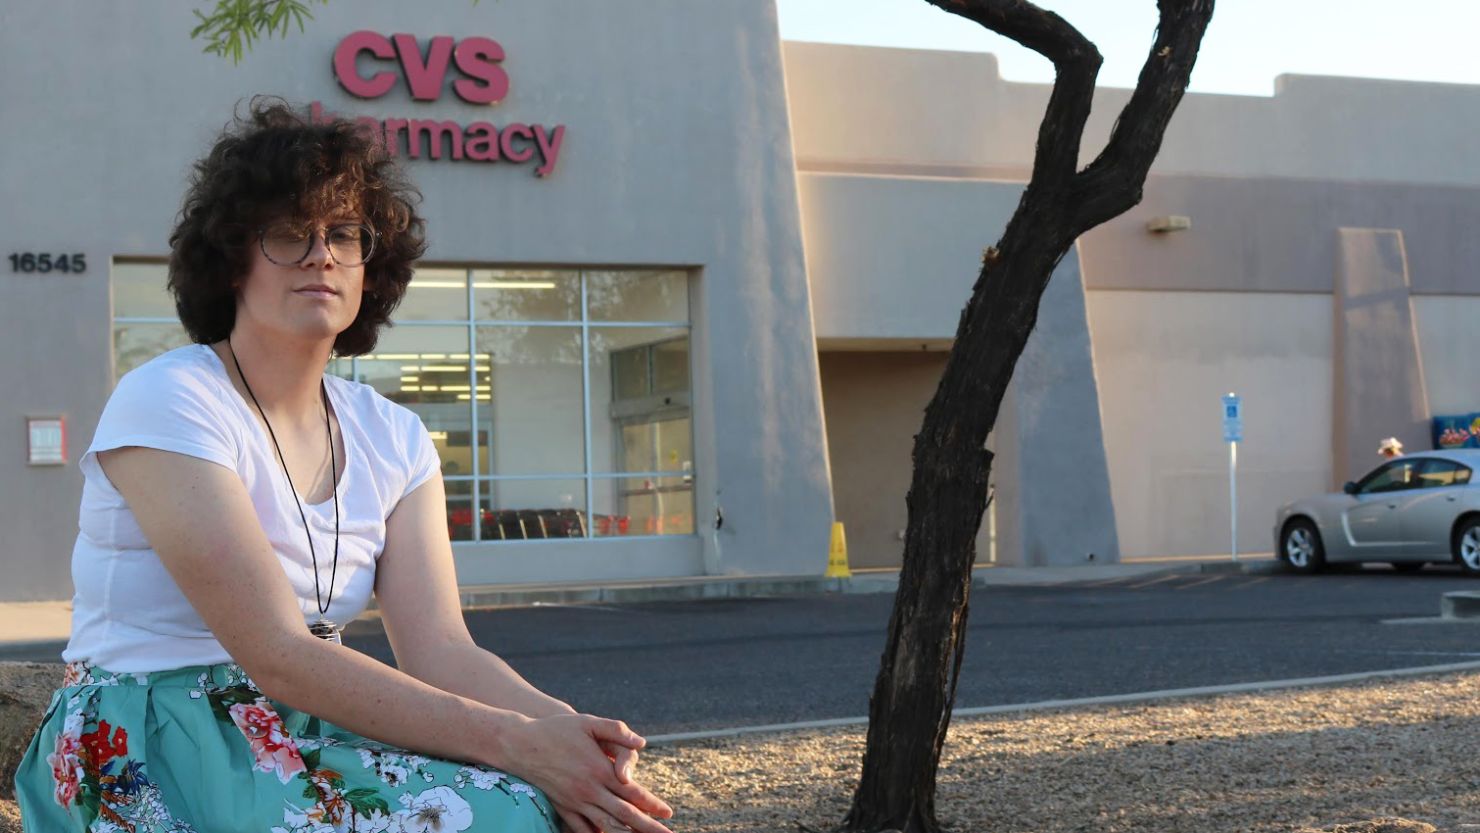 Hilde Hall filed a complaint against a CVS in Arizona after she tried to fill her hormone prescription.